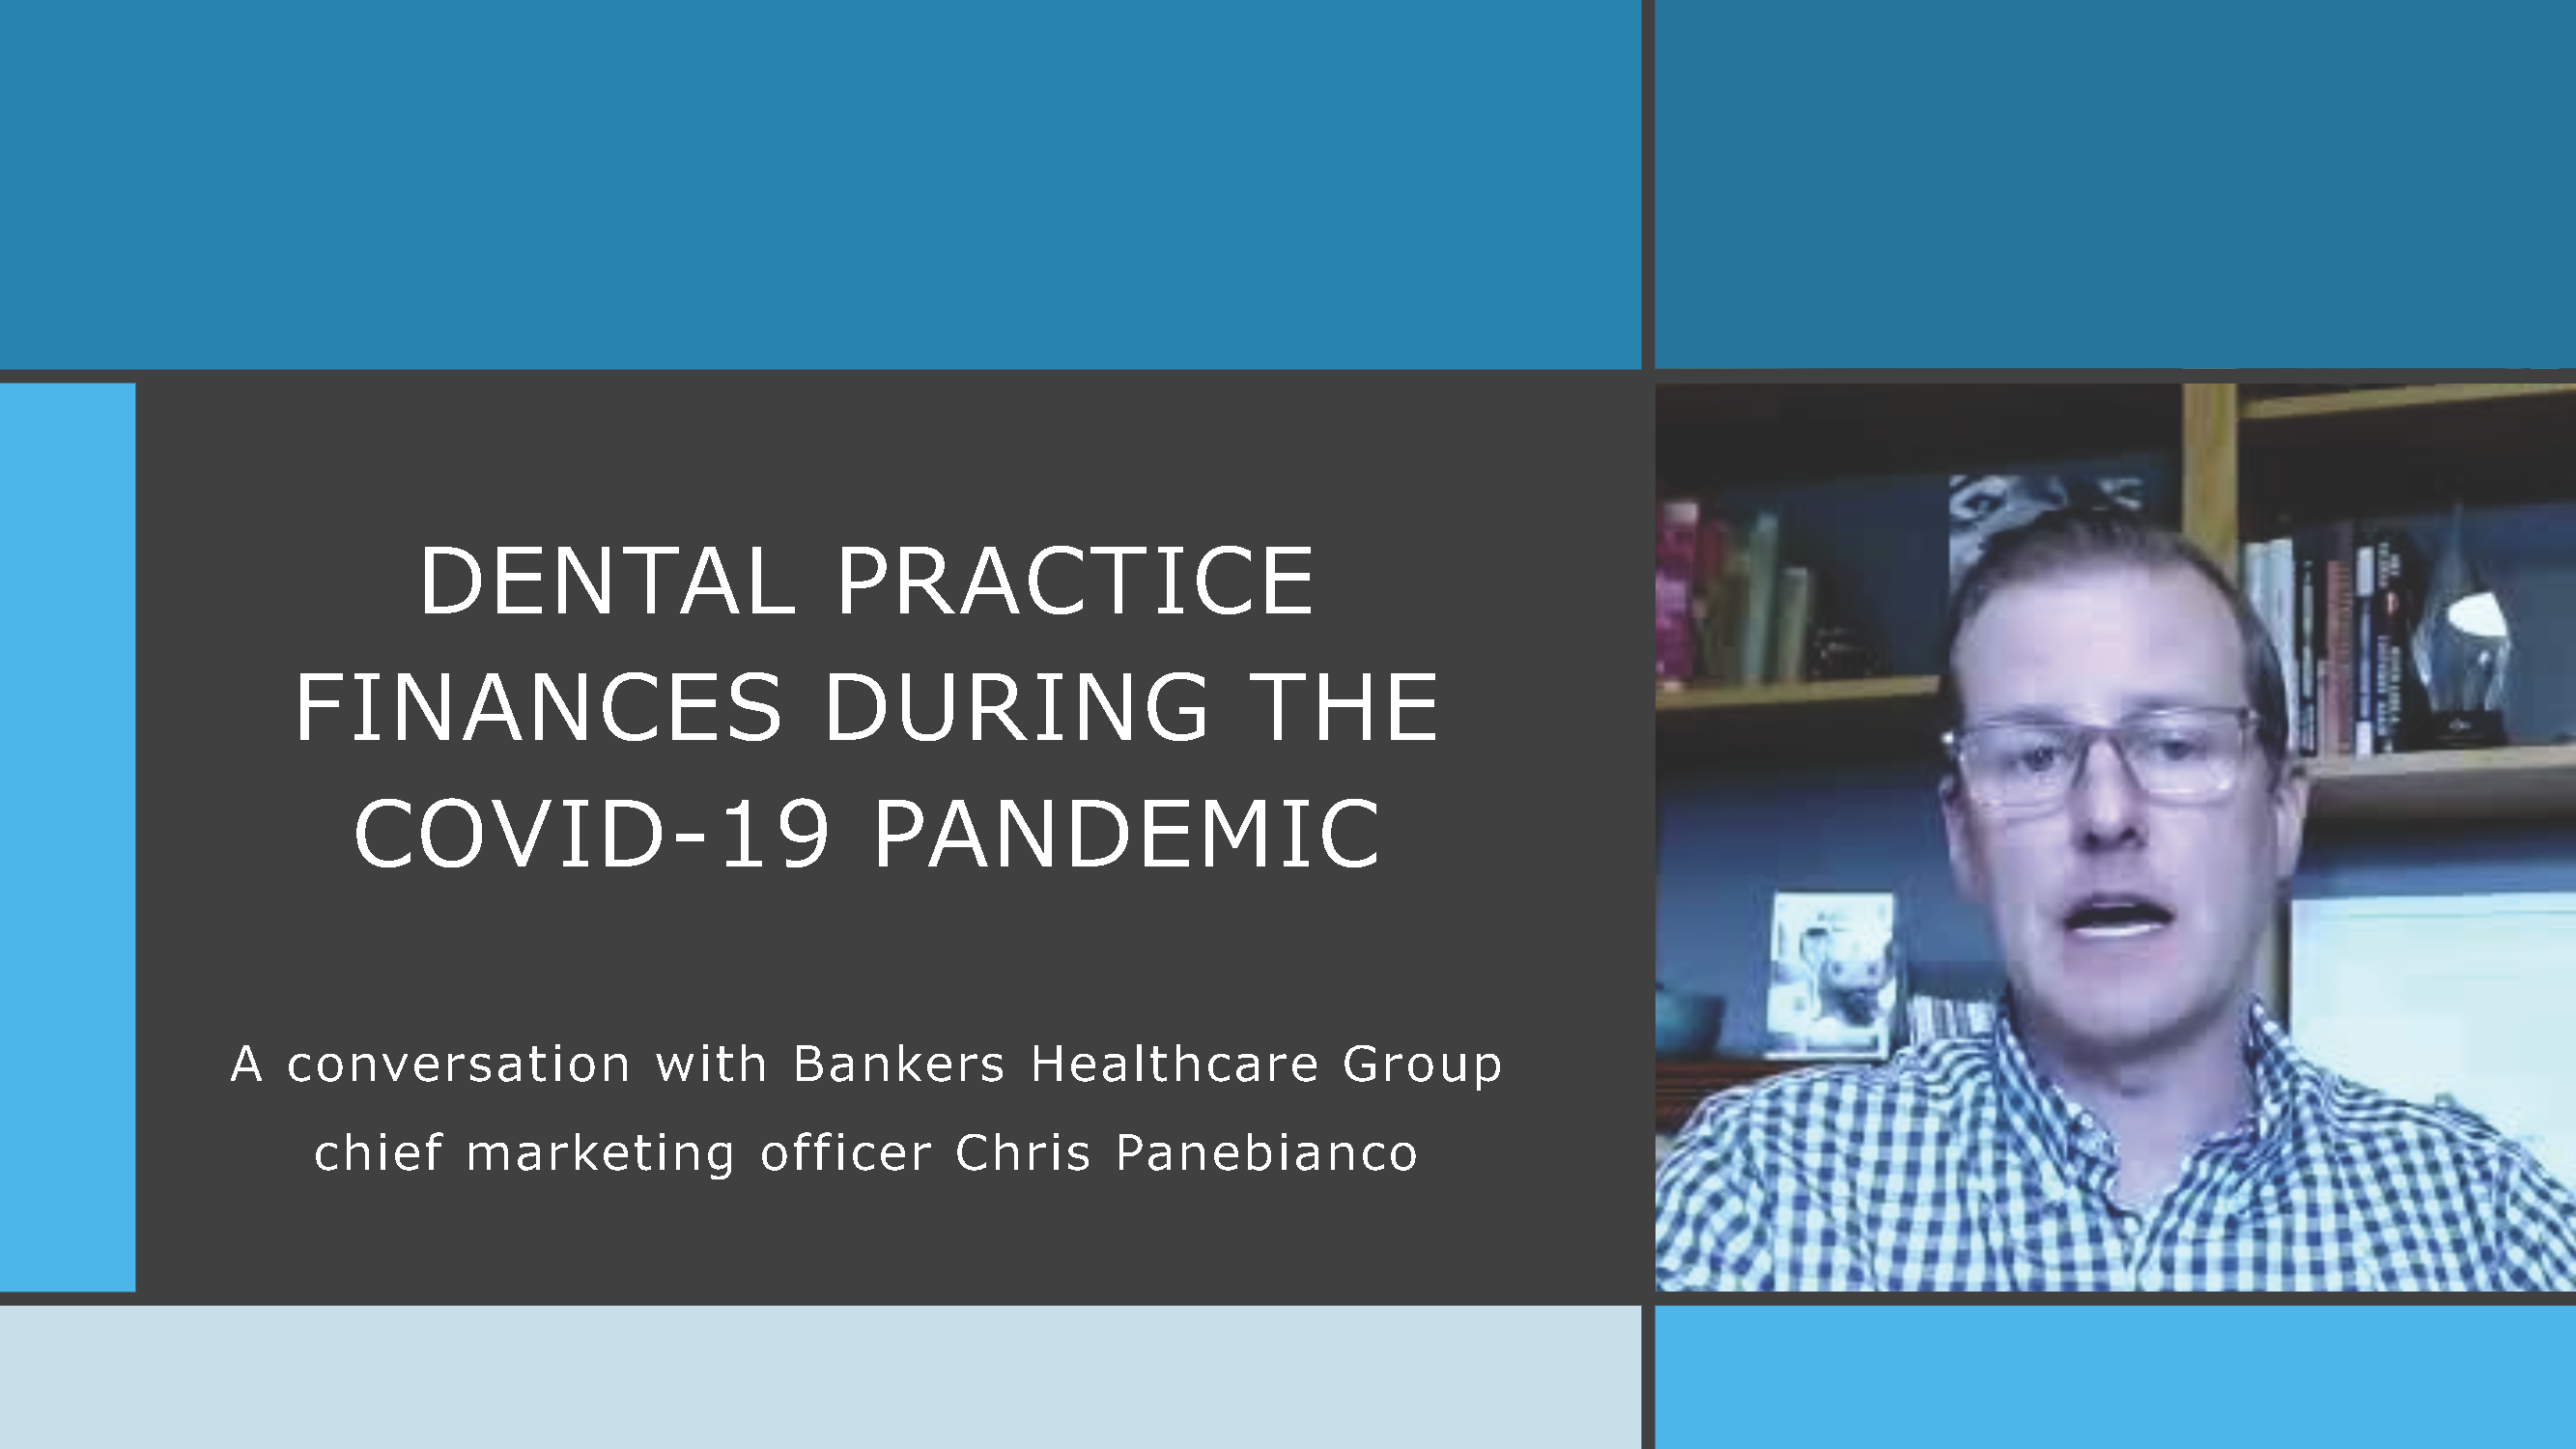 Dental Practice Finances During the COVID-19 Pandemic: A conversation with Bankers Healthcare Group chief marketing officer Chris Panebianco